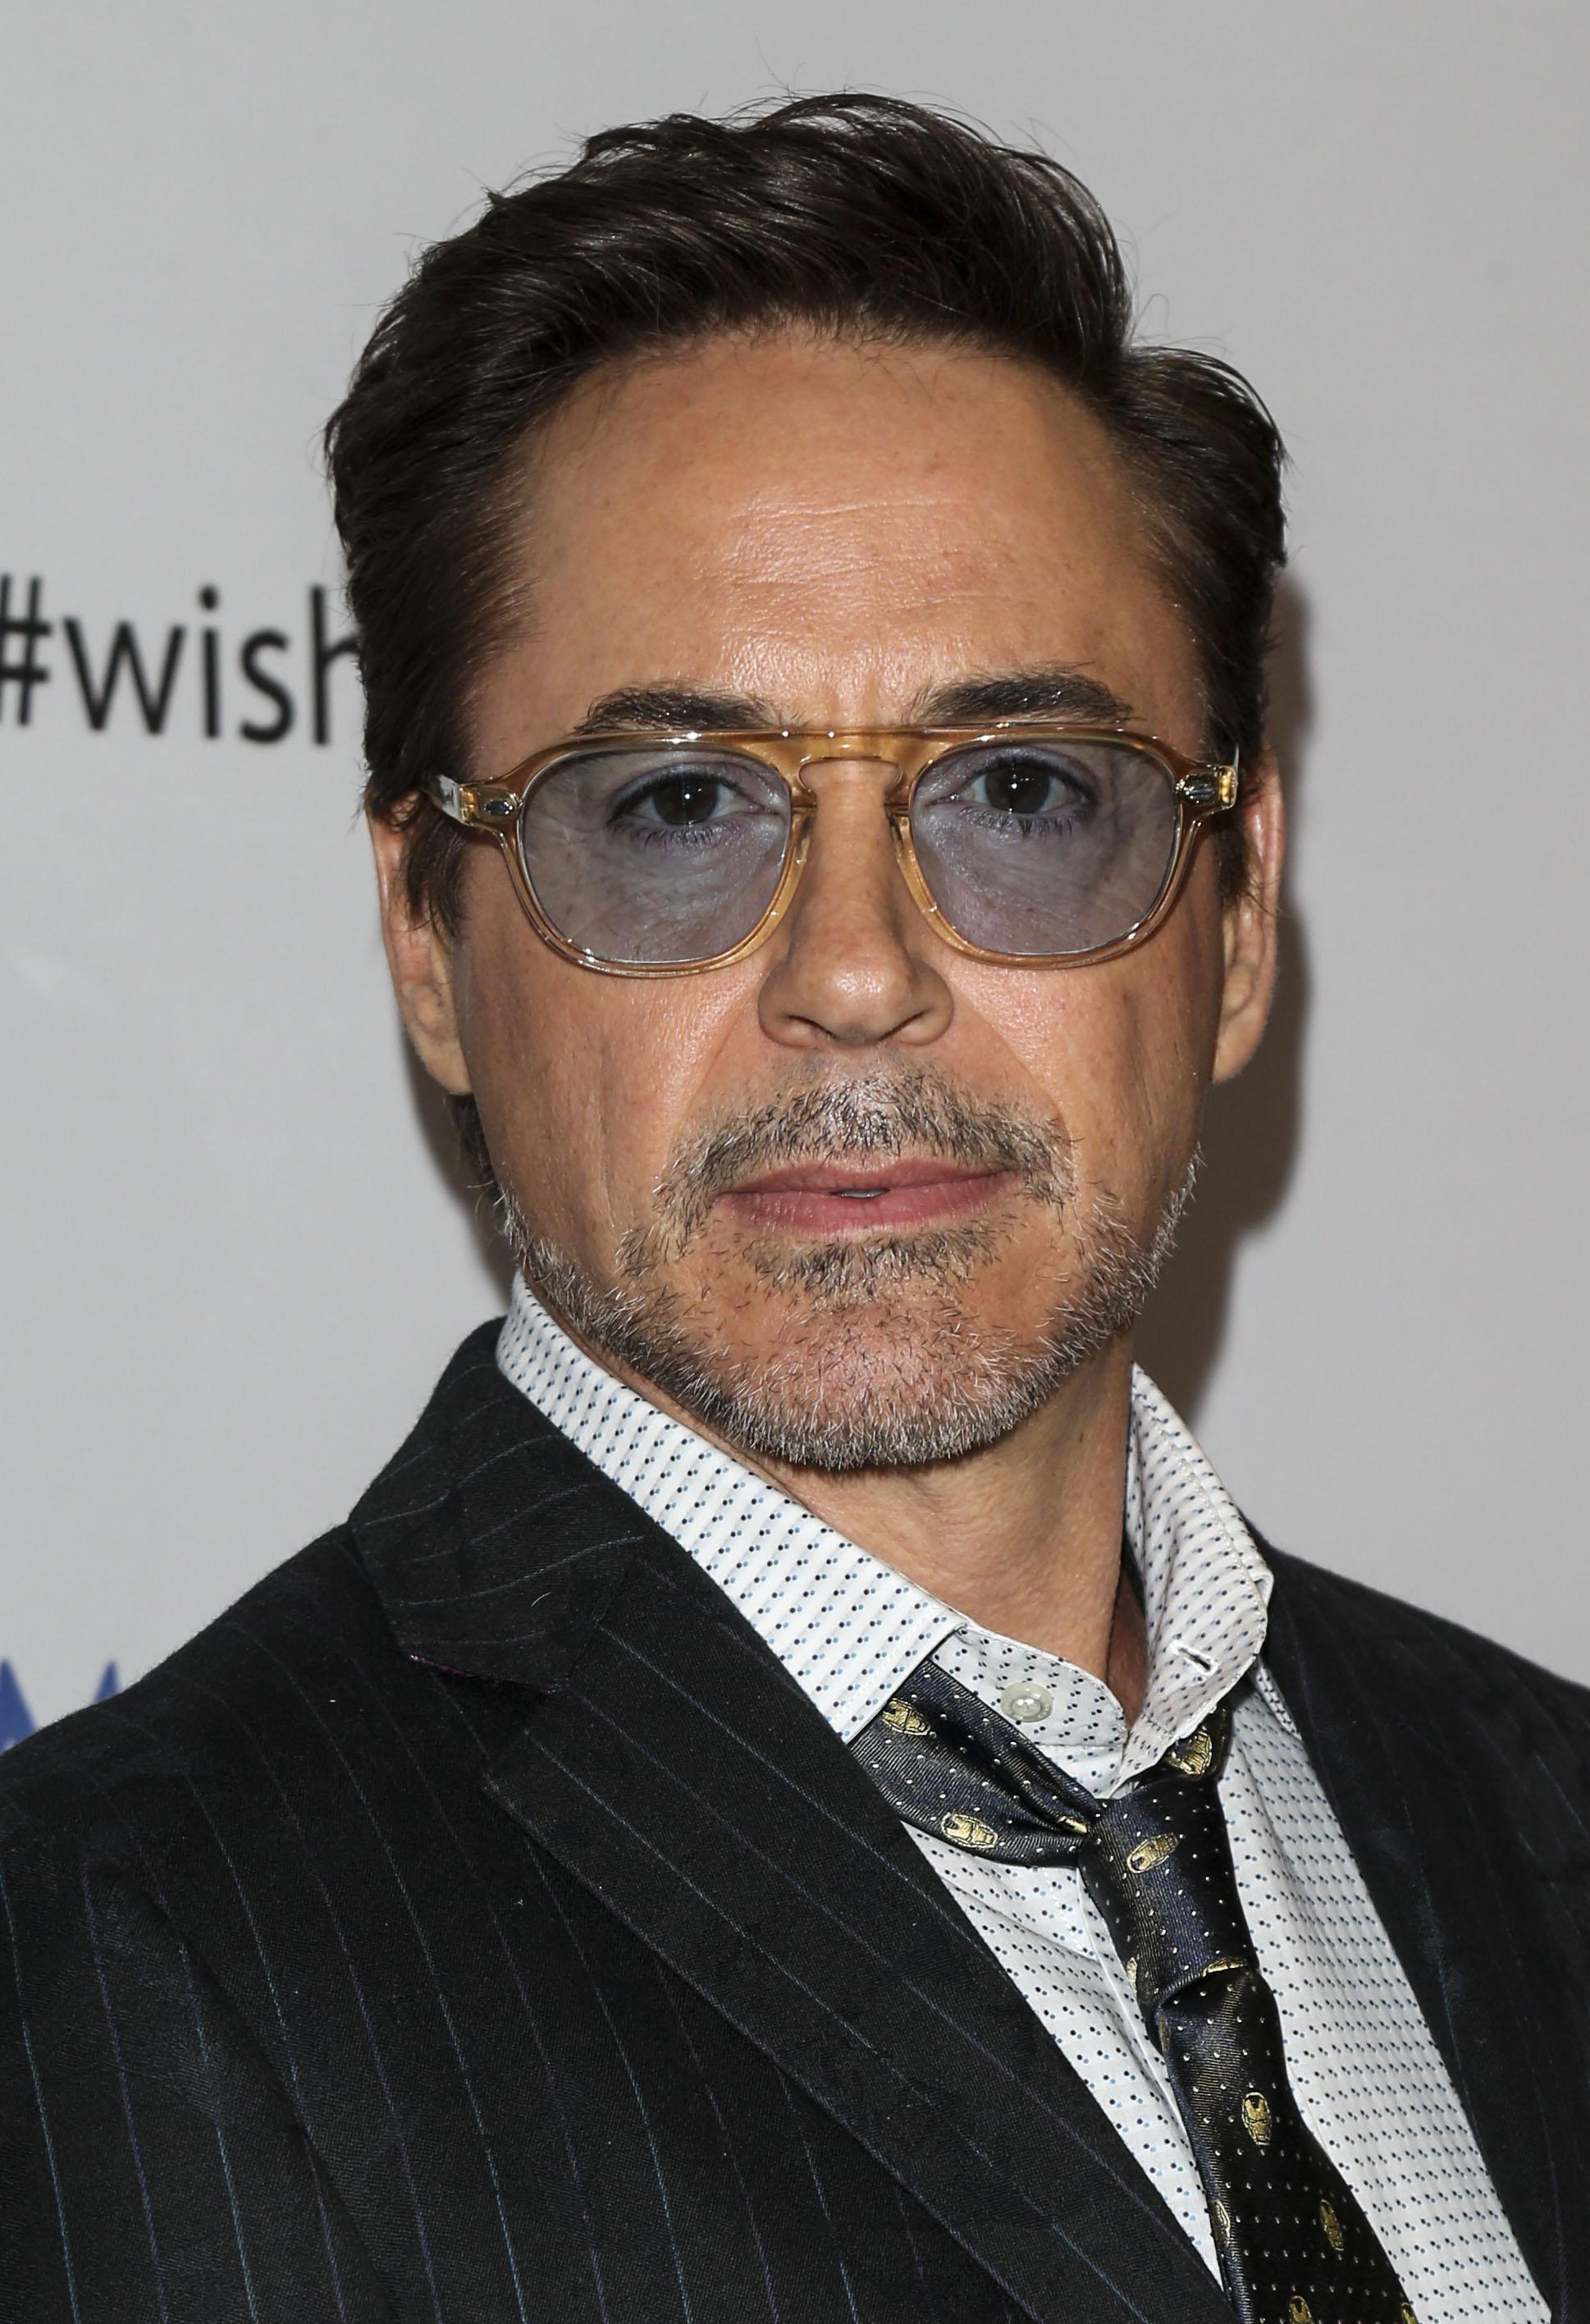 Avengers superstar Robert Downey Jr answers ill Scots lad’s call for